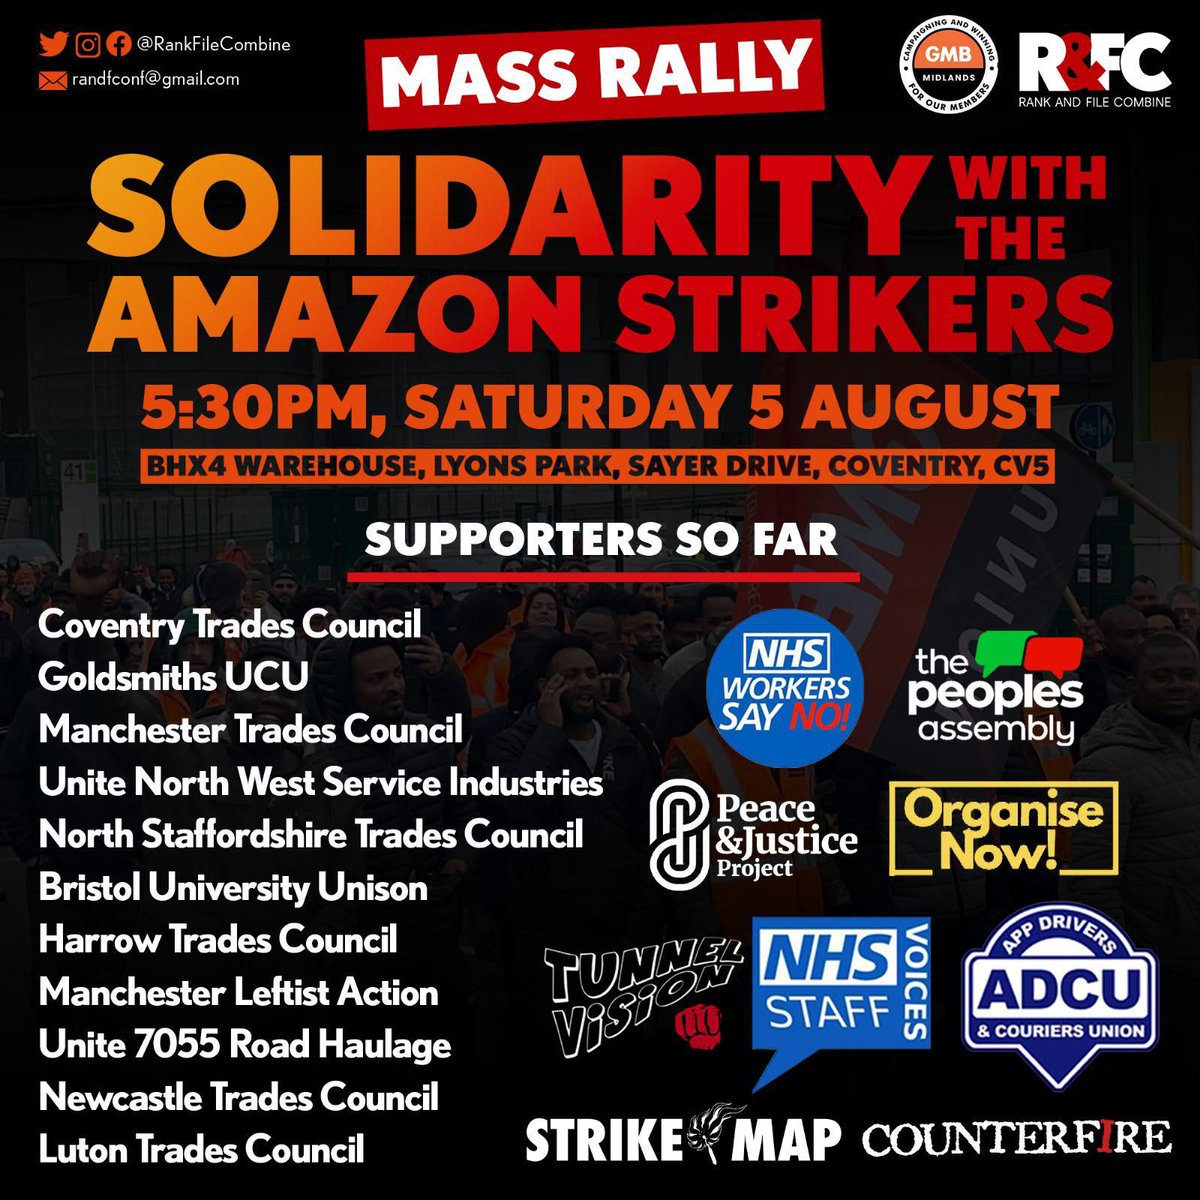 Our branch is supporting the strike solidarity rally with Amazon Strikers on Saturday 5th August. Coach details in the original tweet.